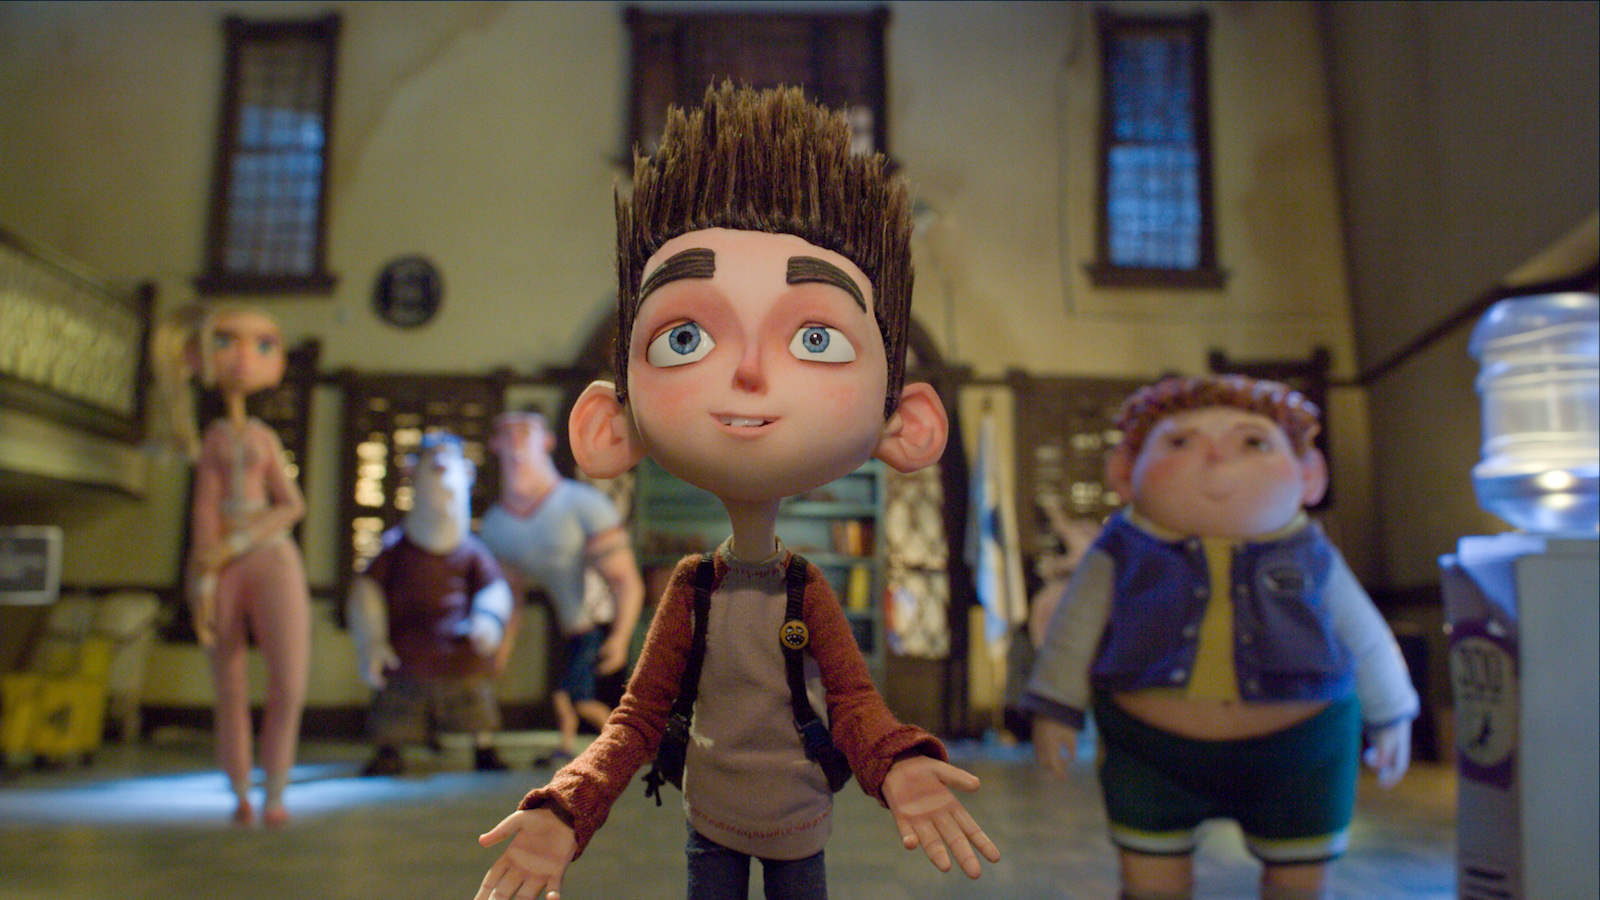 A stop-motion animated boy surrounded by his friends in the background, looking up towards the camera